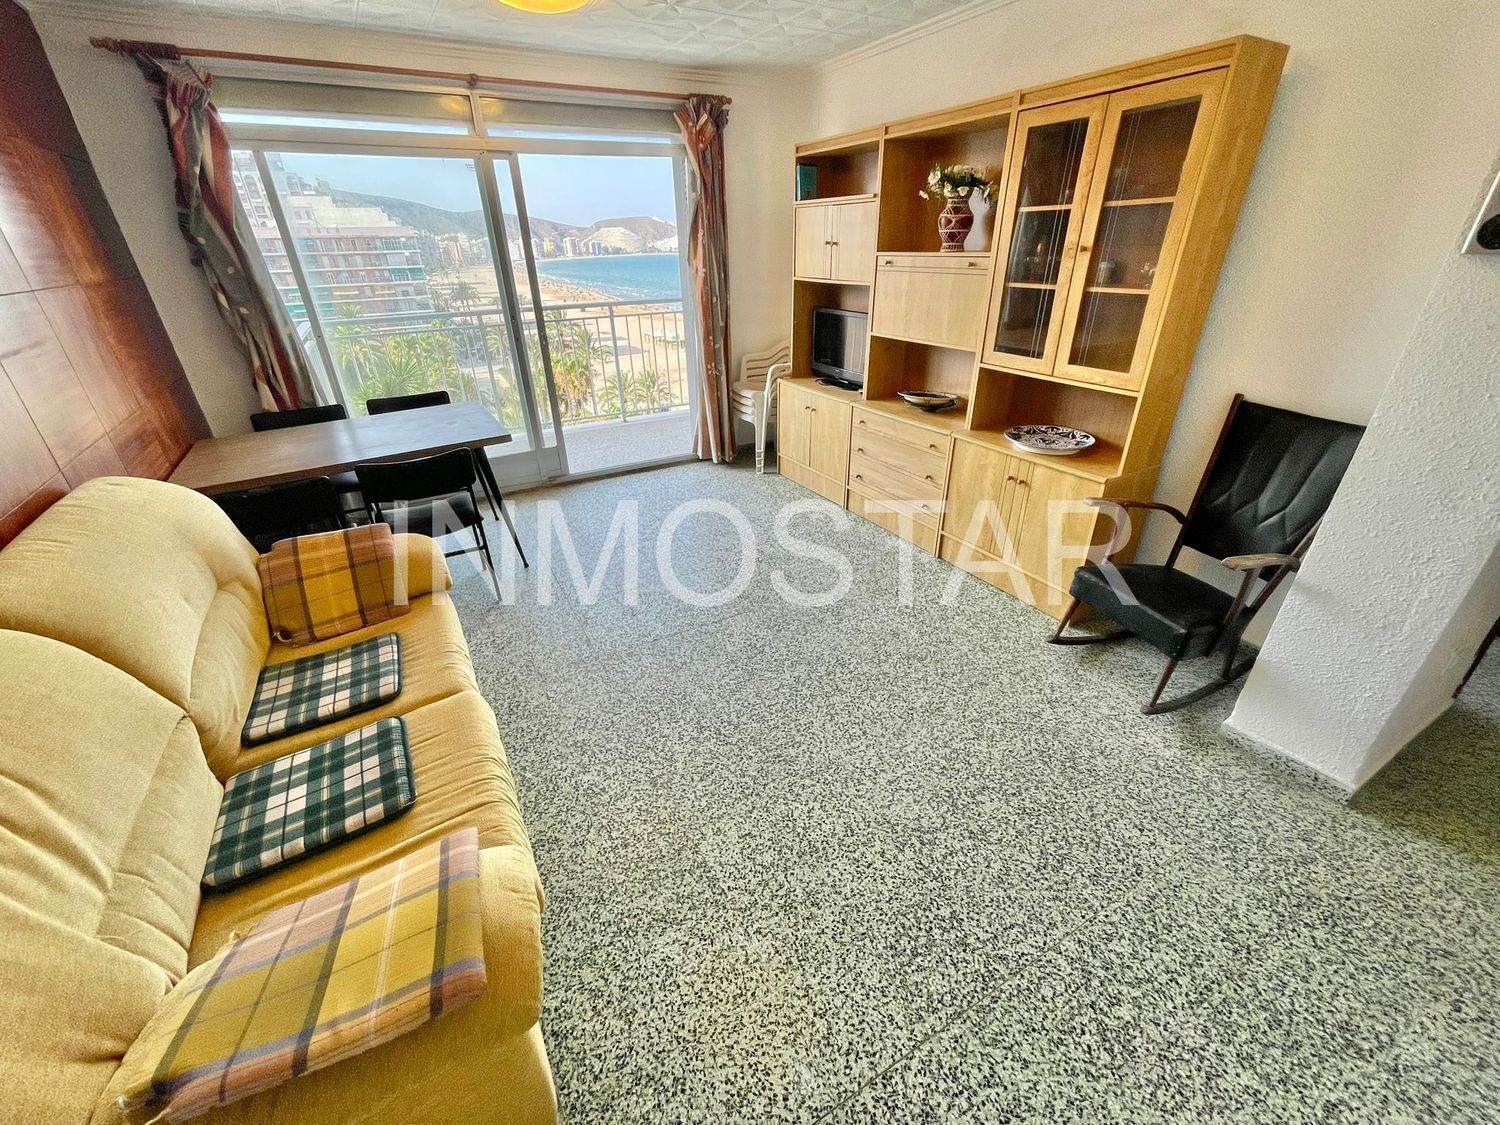 Apartment for sale on the seafront on Avenida Alacant, in Cullera